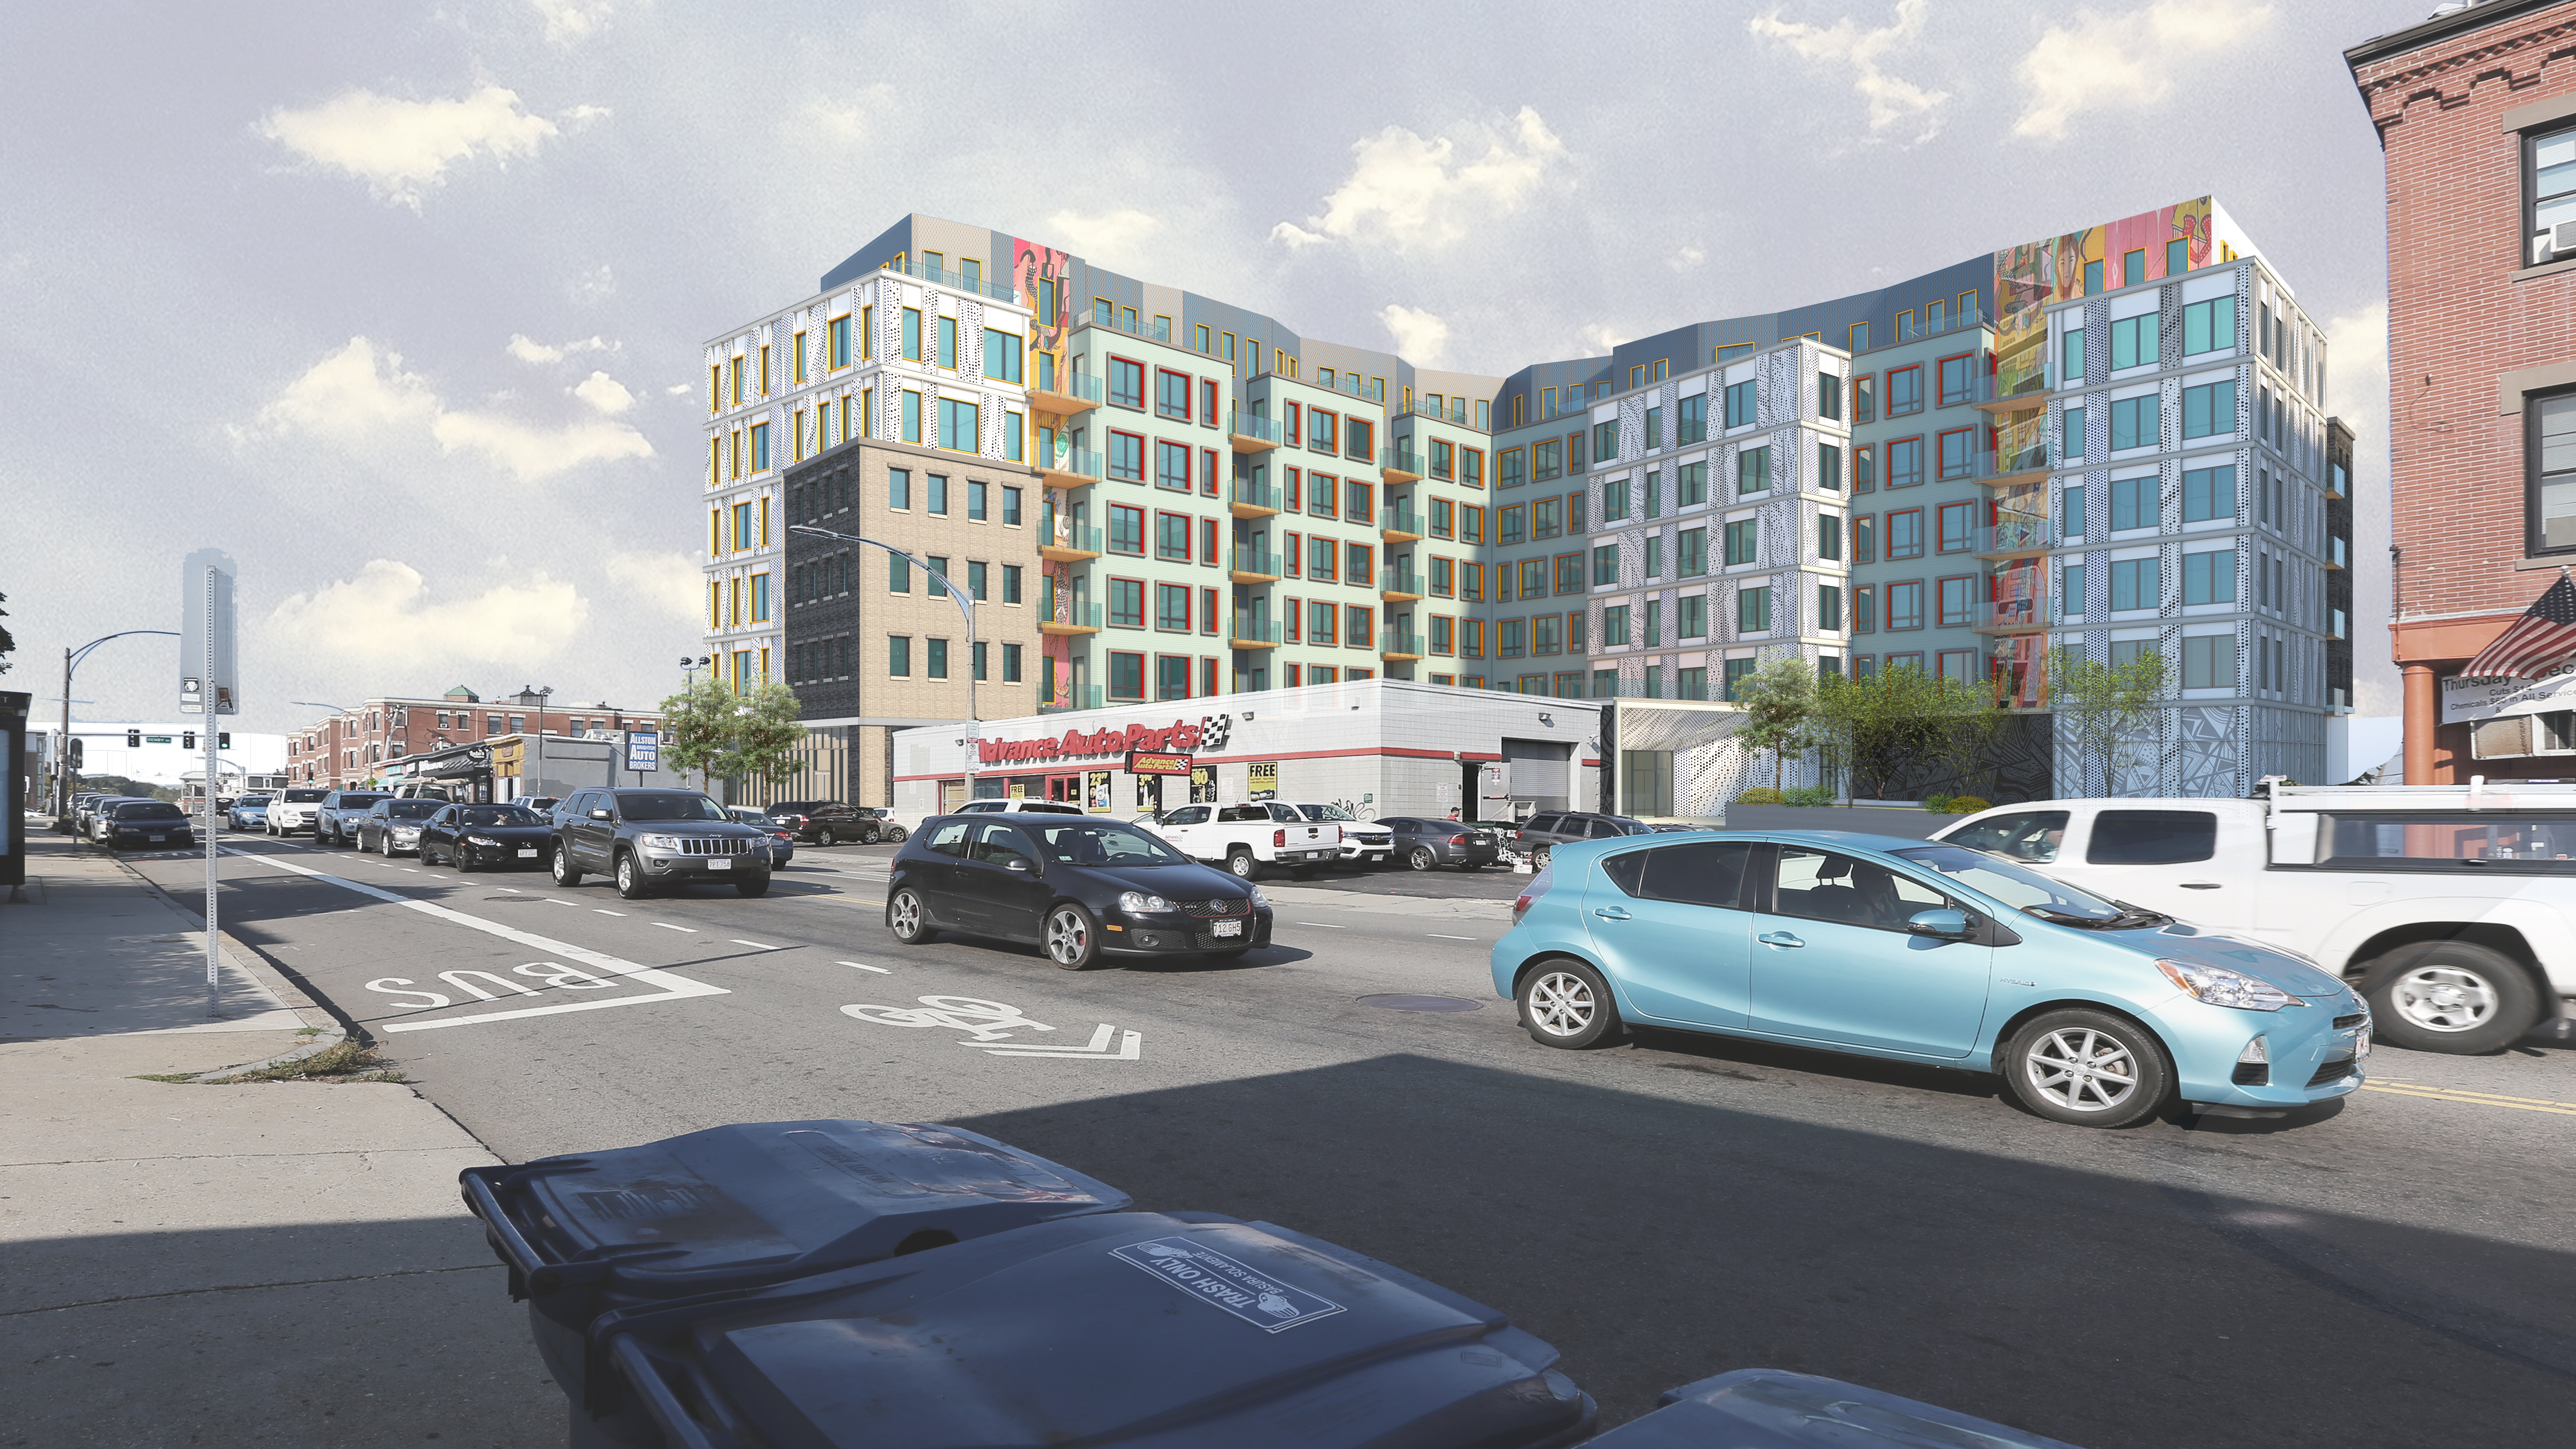 A rendering of the planned Allston Square project in Allston.